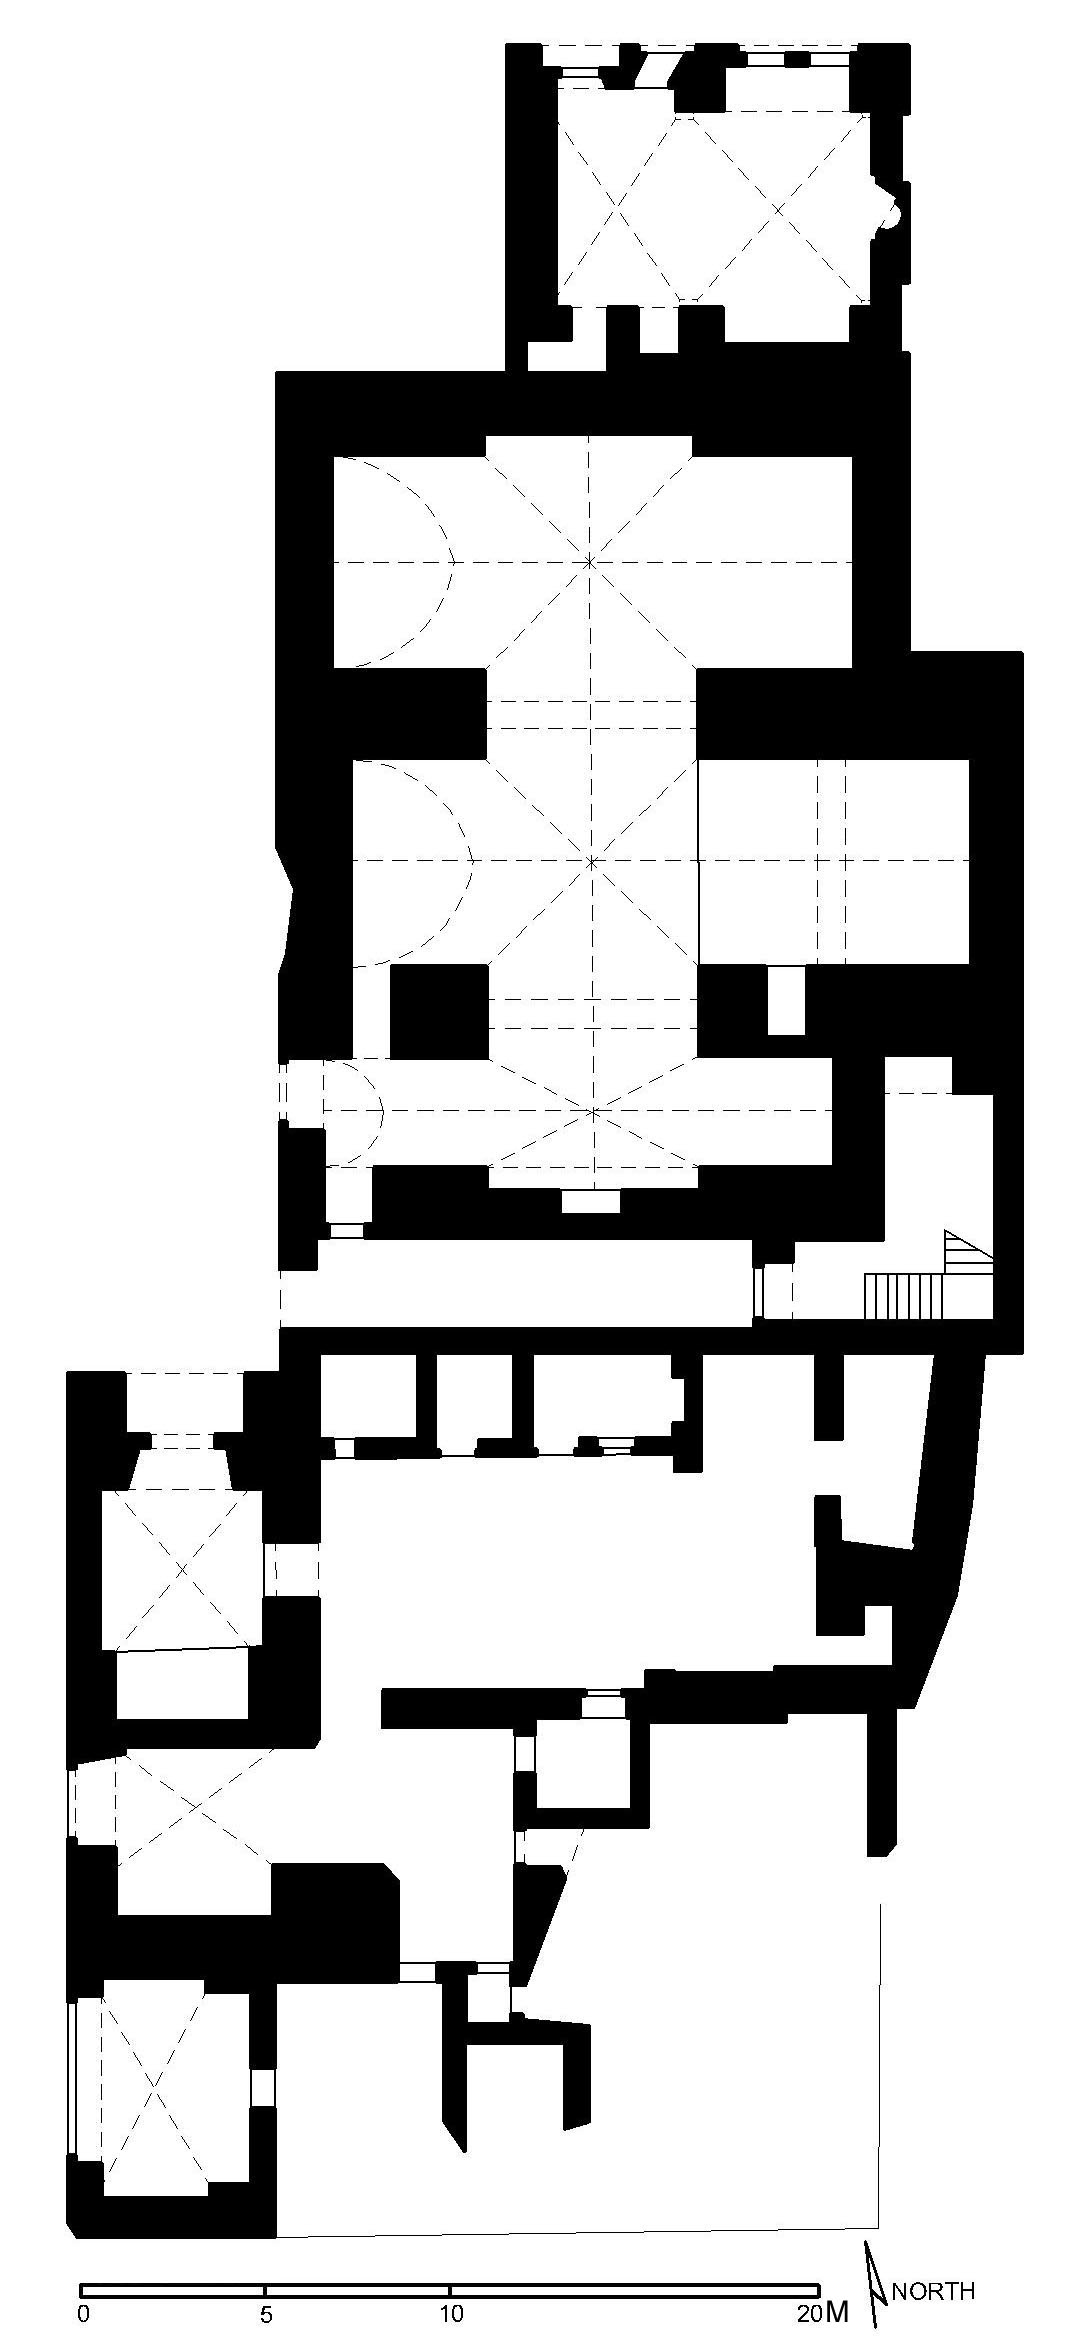 Qasr Amir Alin Aq - Floor plan of palace in AutoCAD 2000 format. Click the download button to download a zipped file containing the .dwg file. 